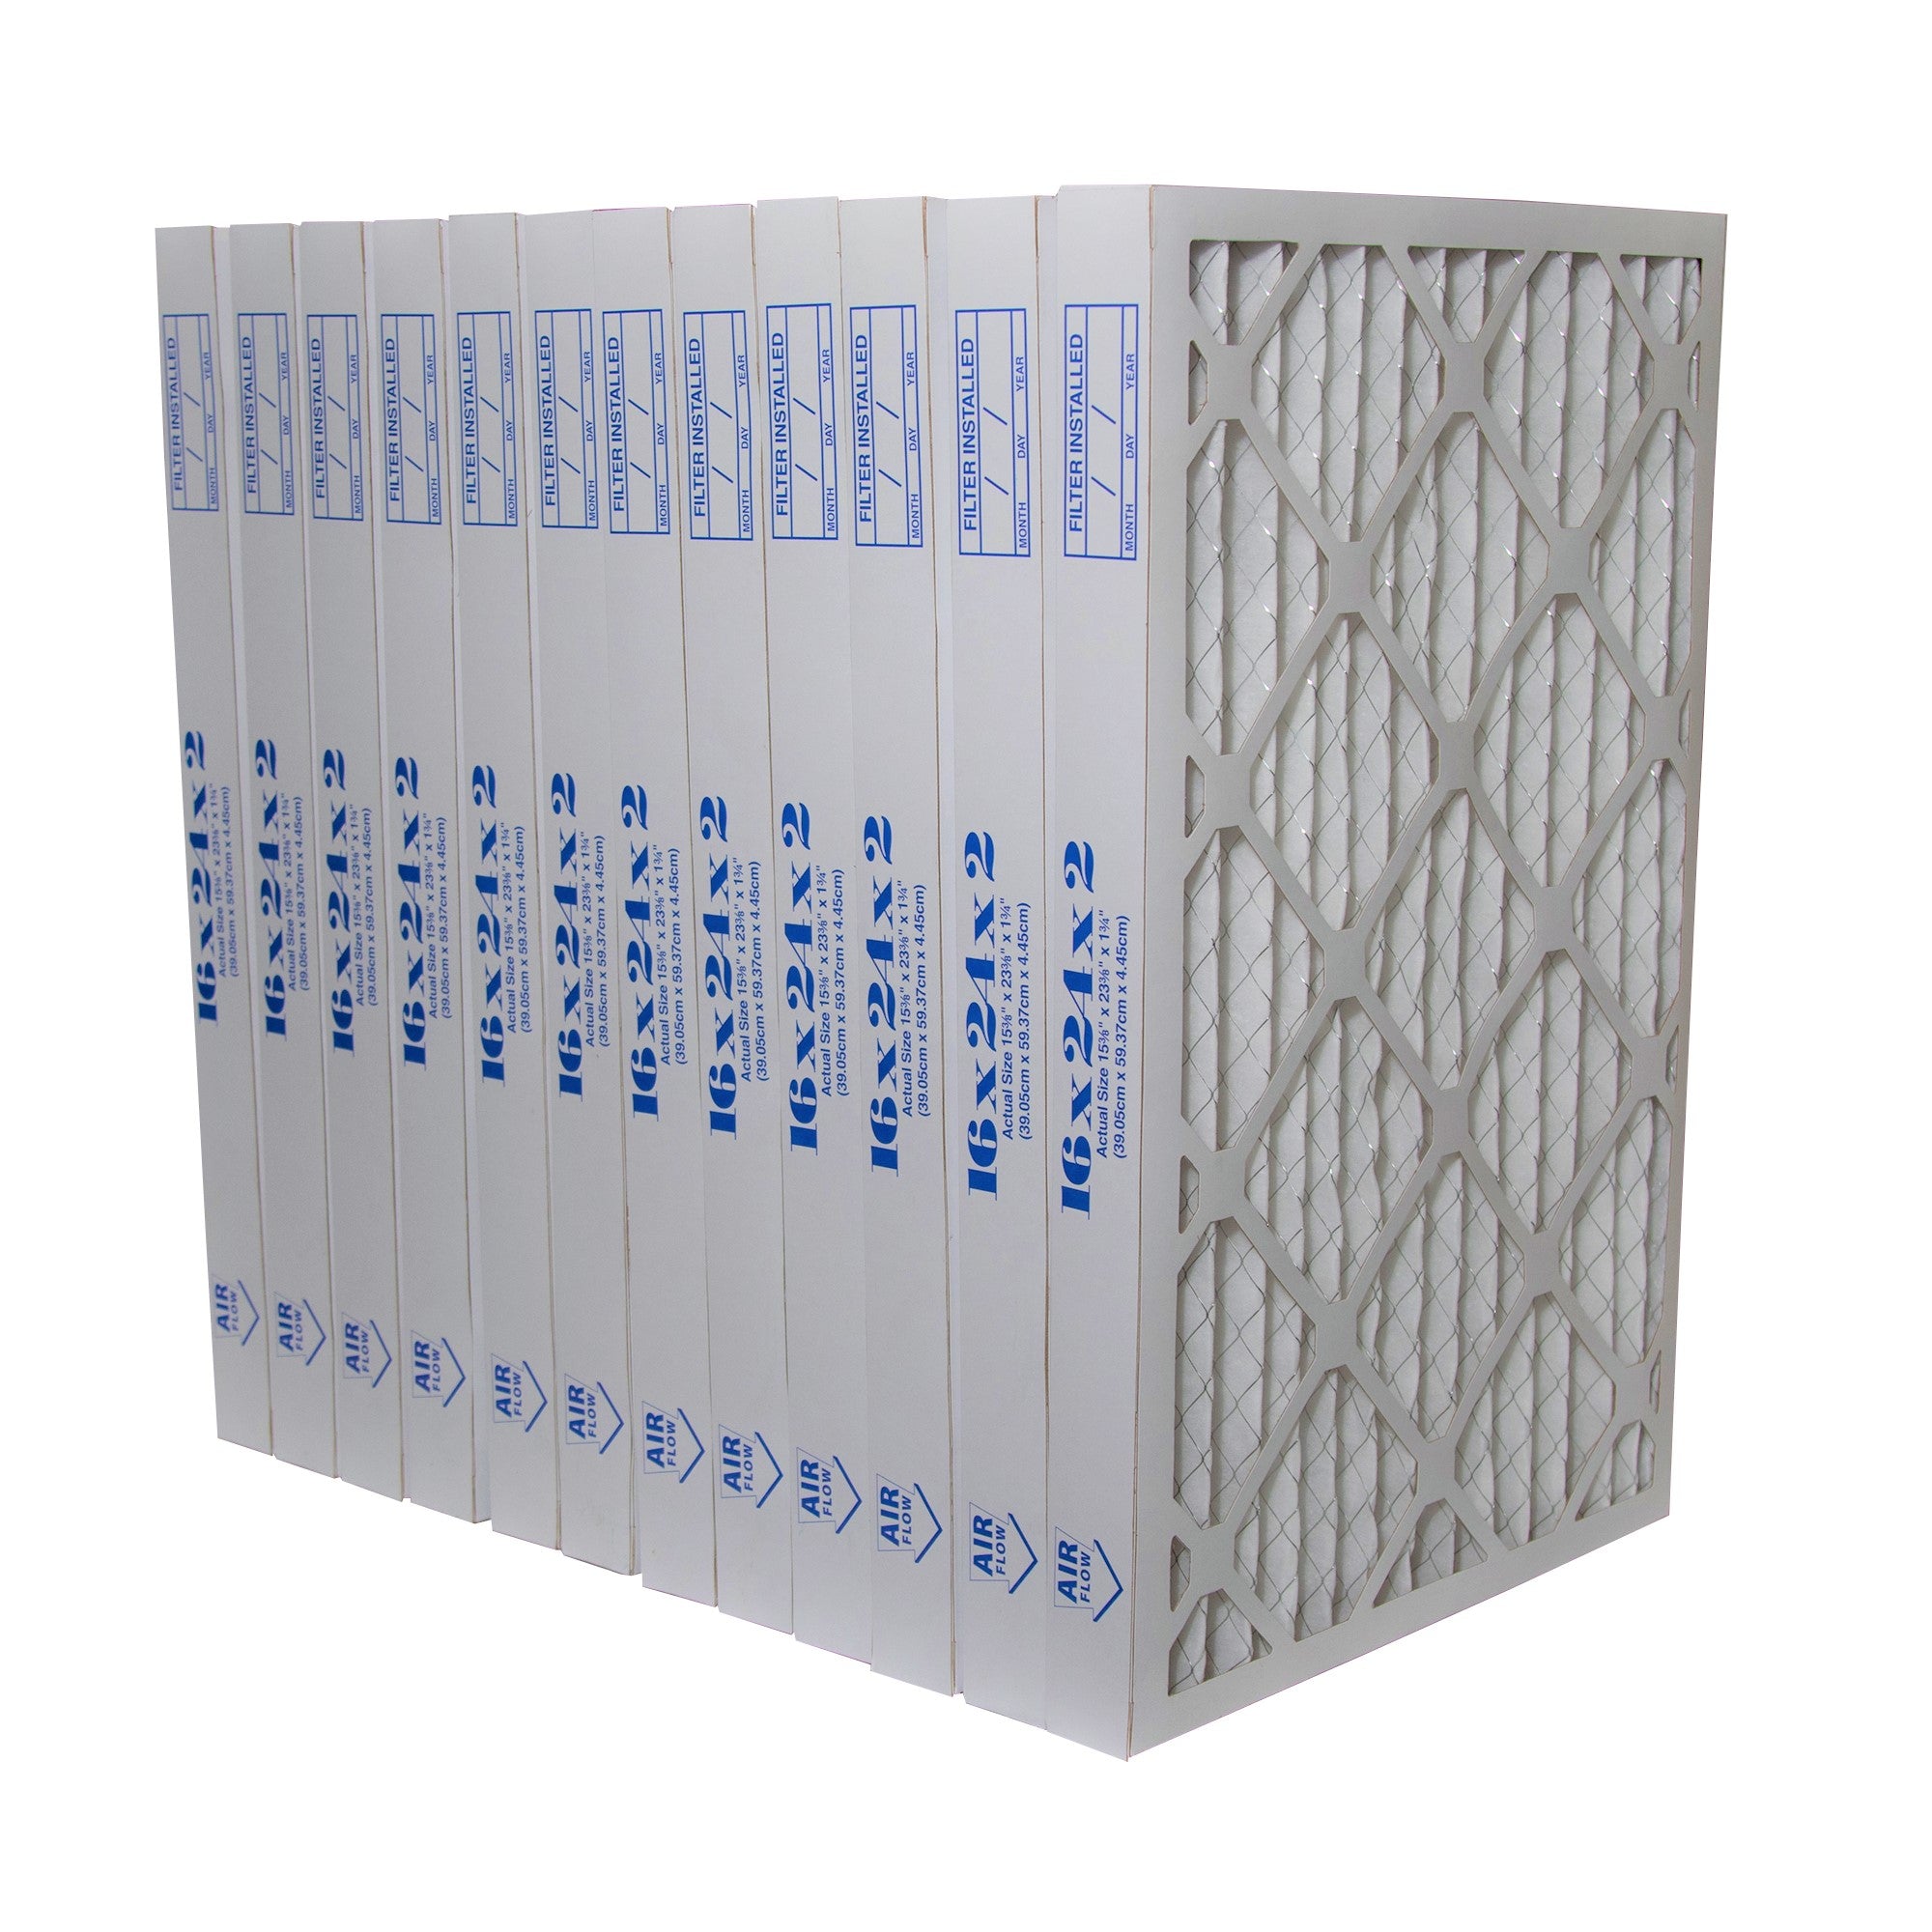 16x24x2 Furnace Filter MERV 8 Pleated Filters. Case of 12